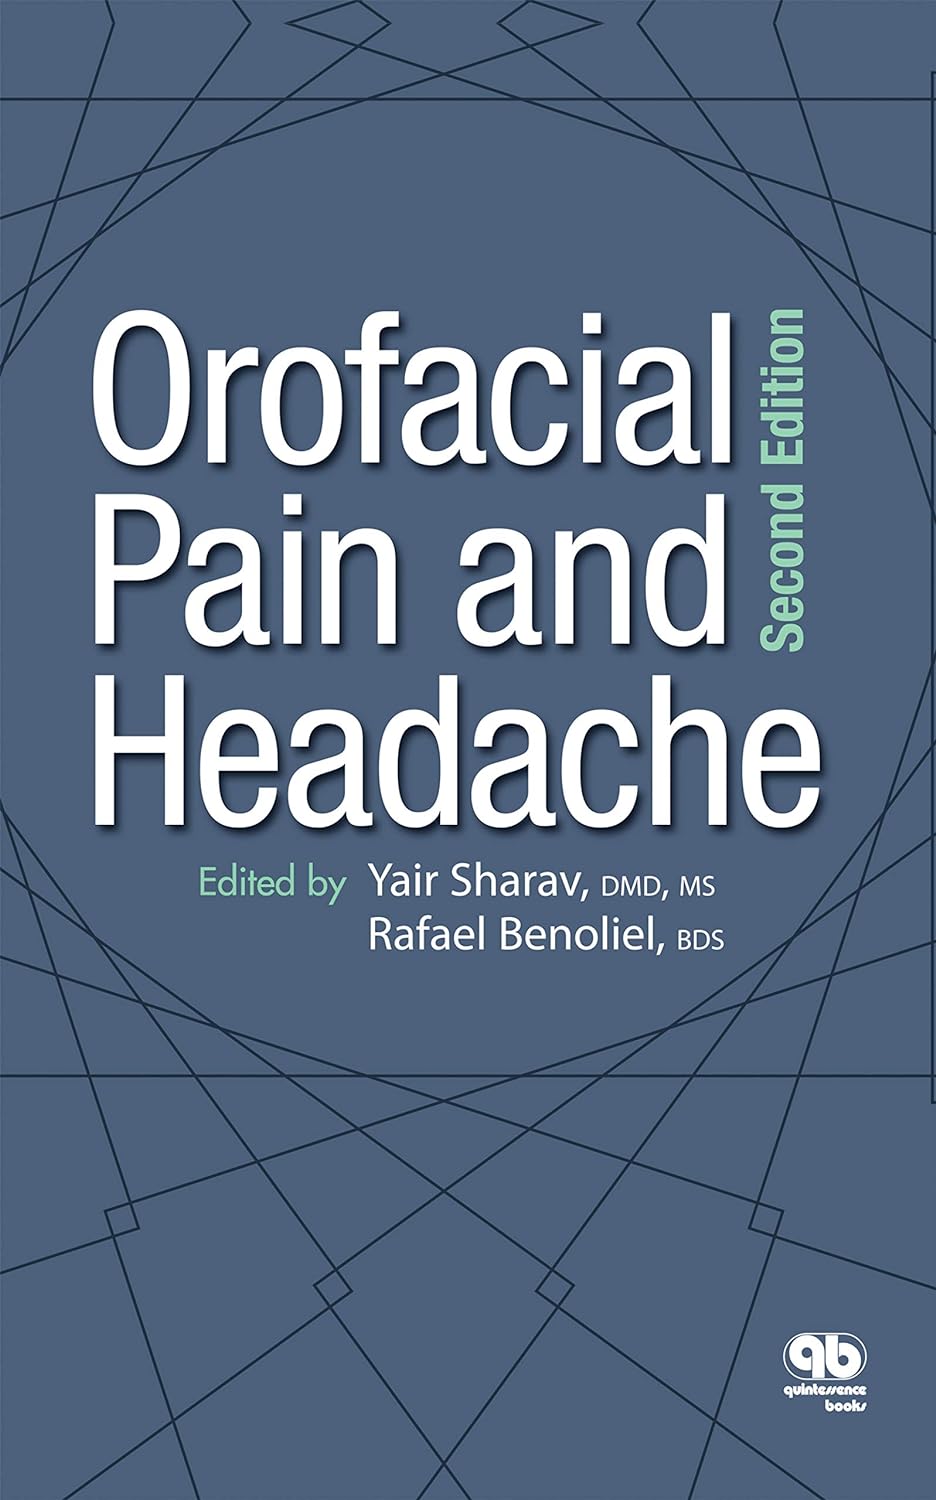 Orofacial Pain and Headache Second Edition 2nd Edition